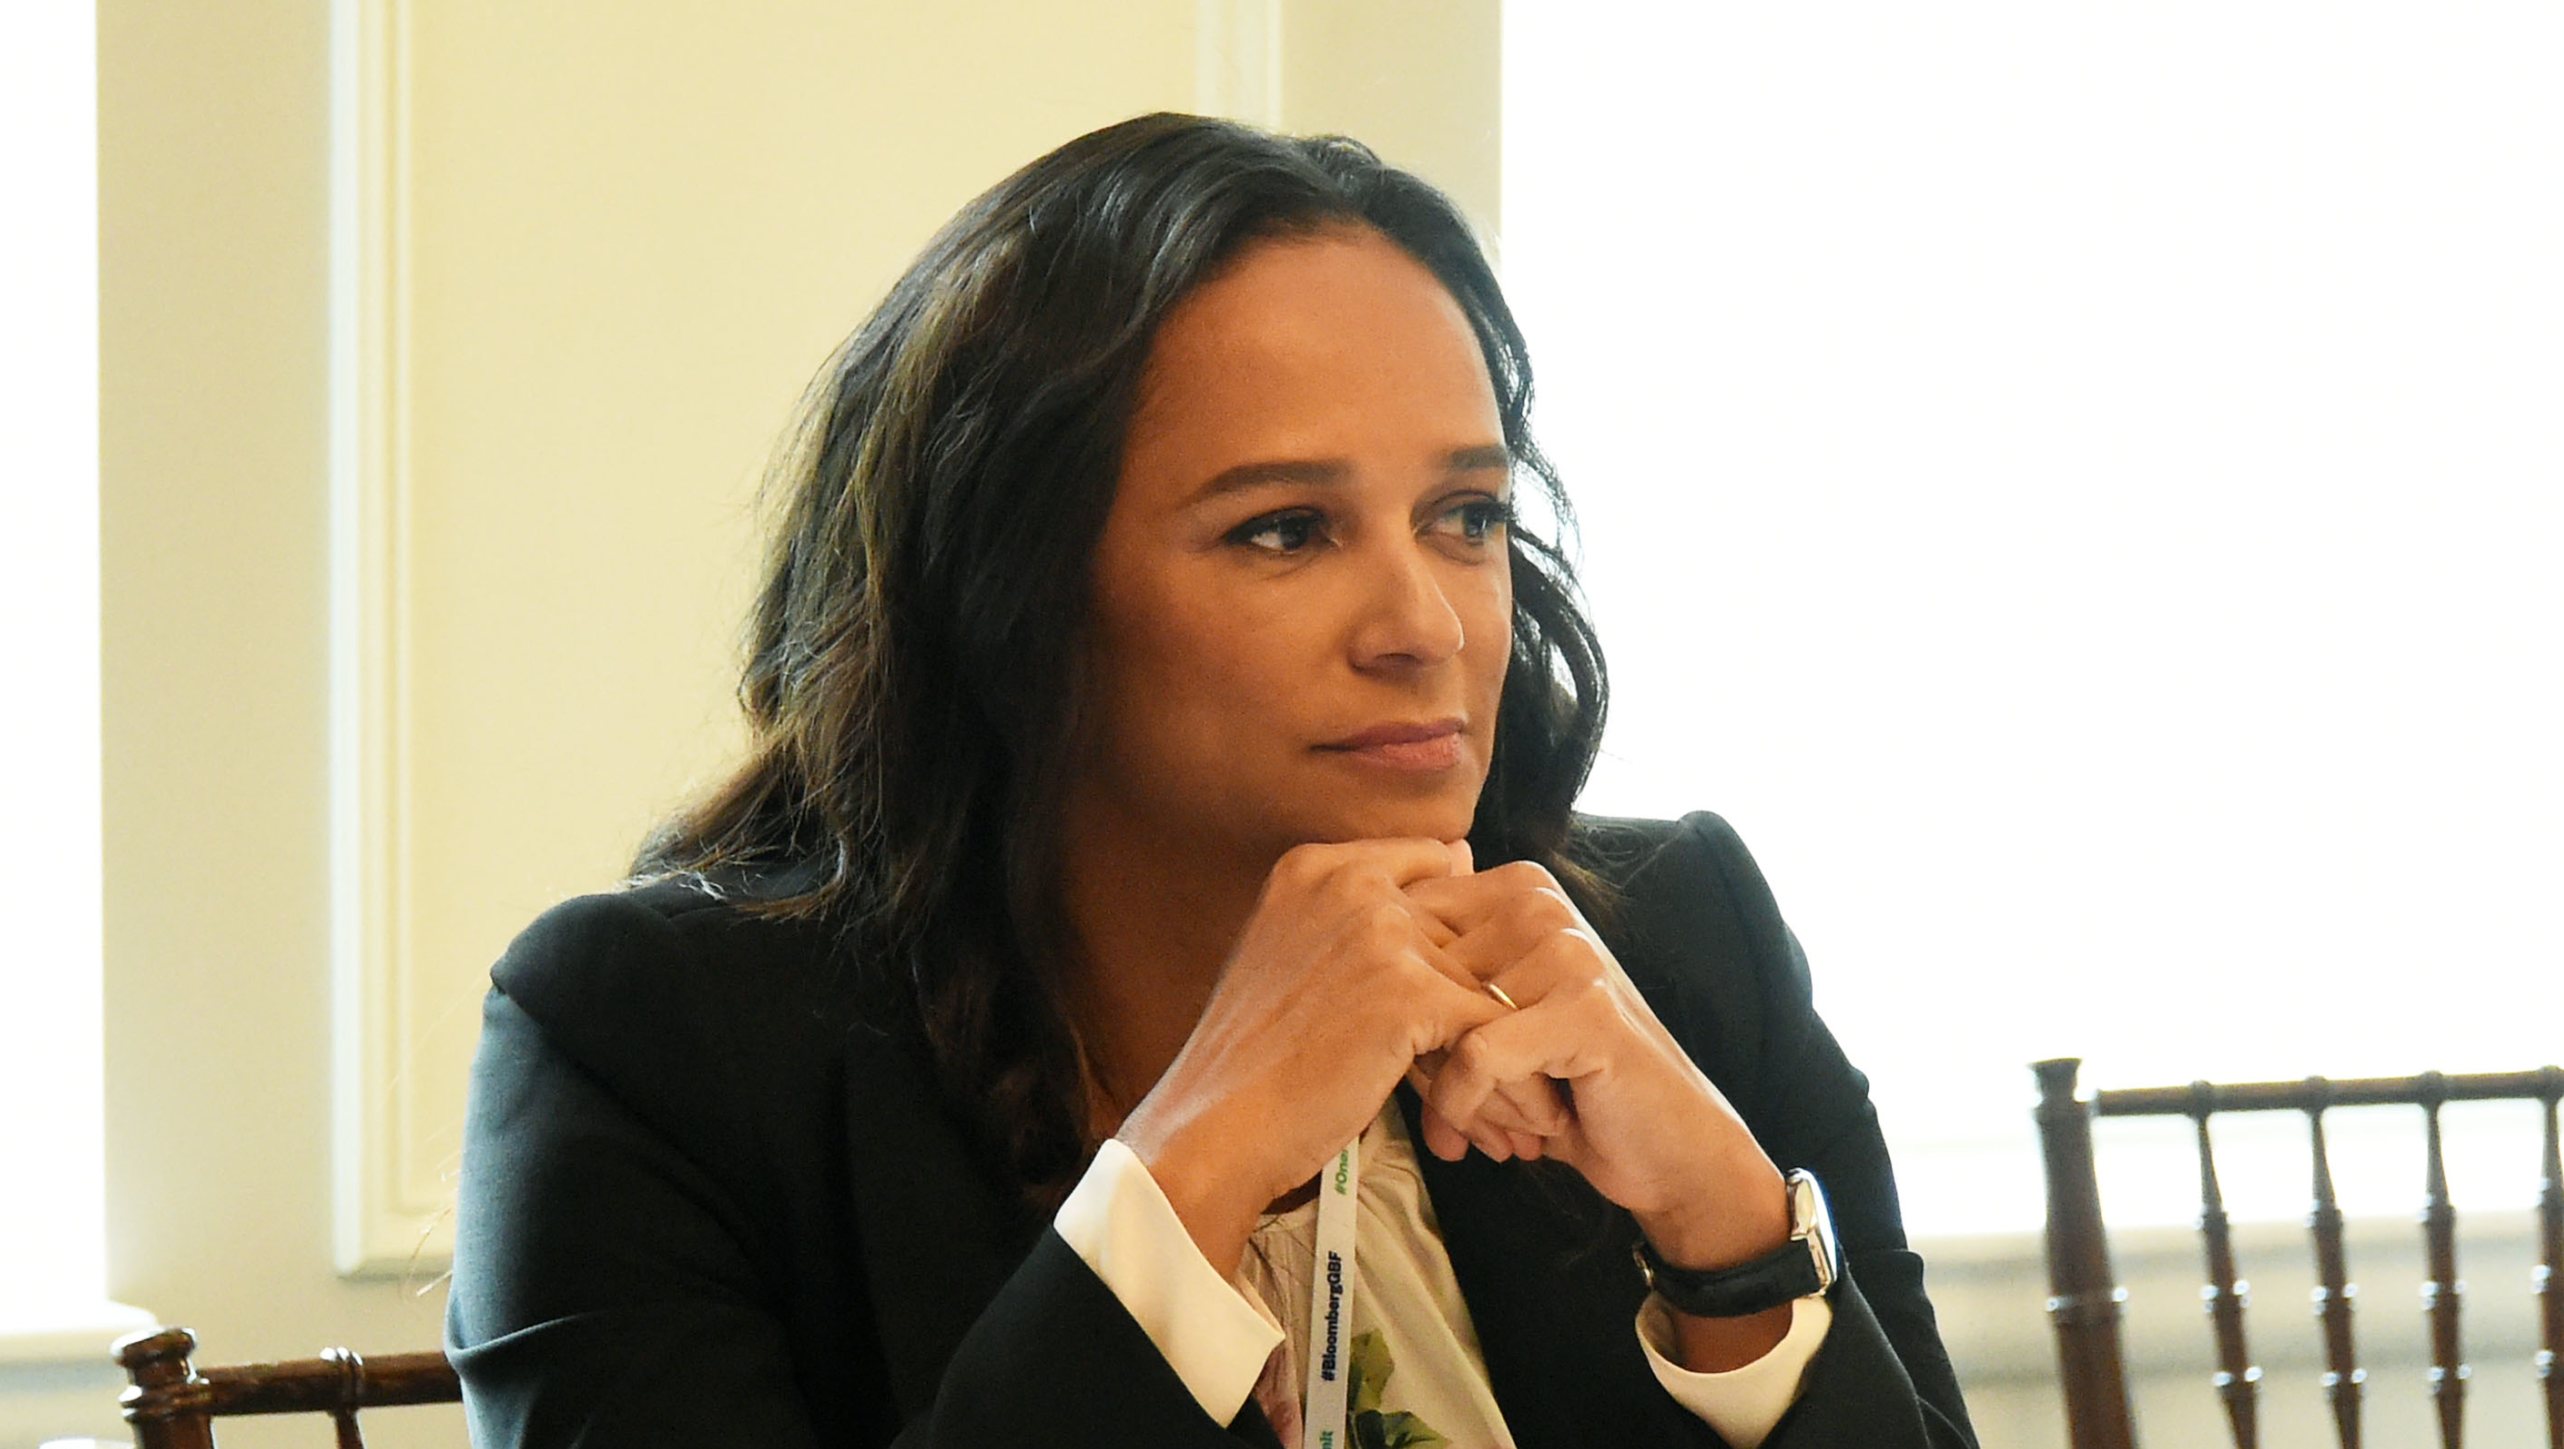 Isabel dos Santos At Roundtable Discussion On Business Evolution In Energy At Bloomberg Global Business Forum